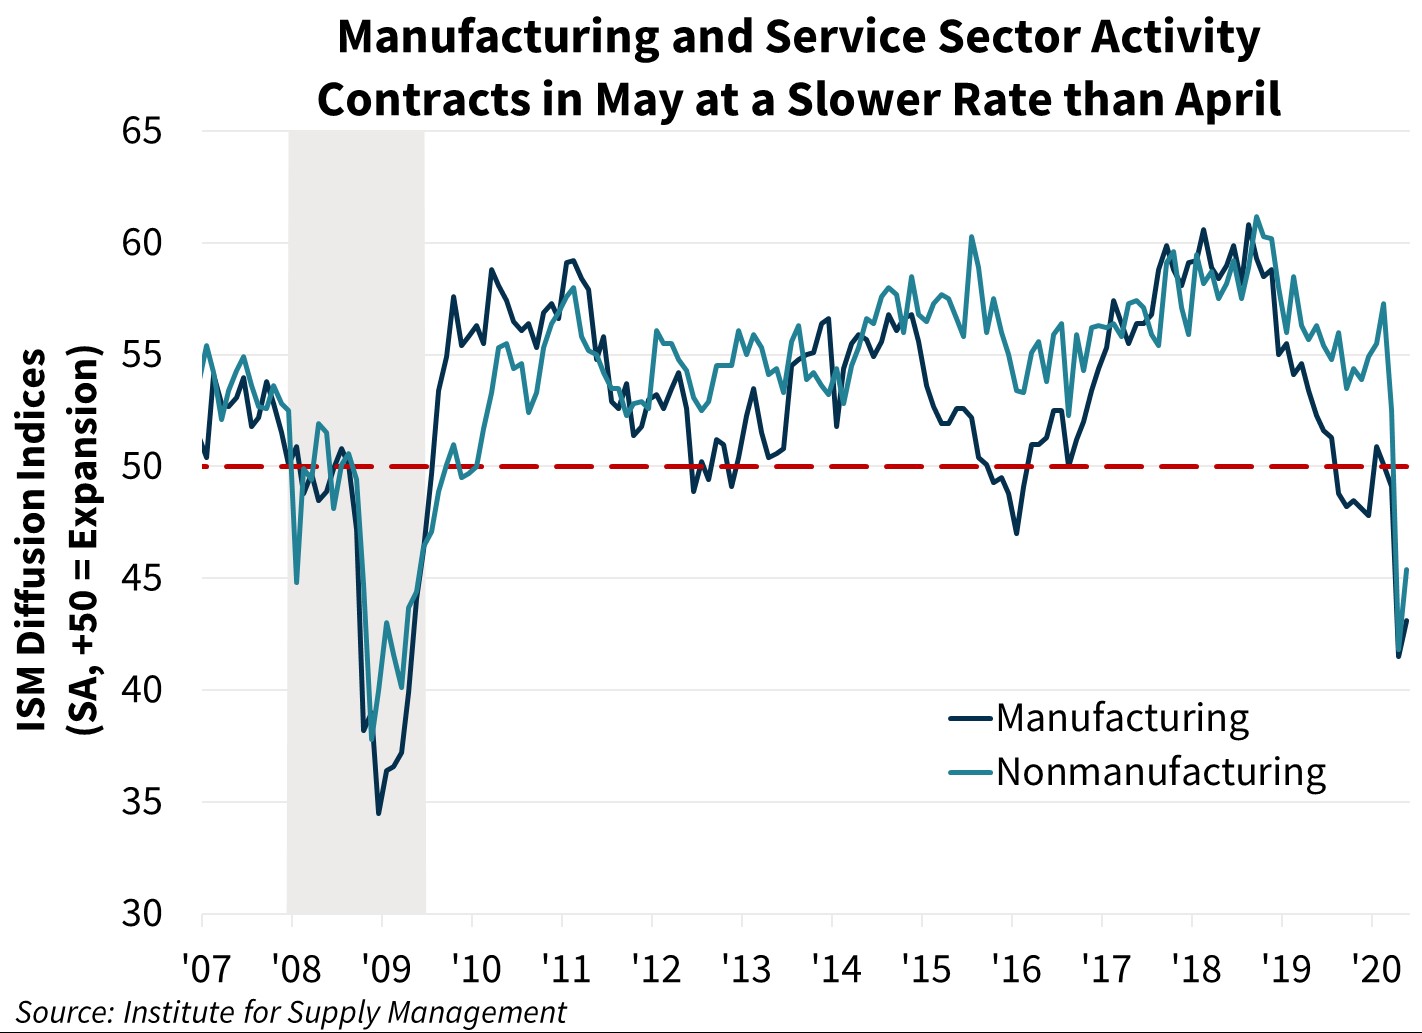 Manufacturing and Service Sector Activity Contracts in May at a Slower Rate than April